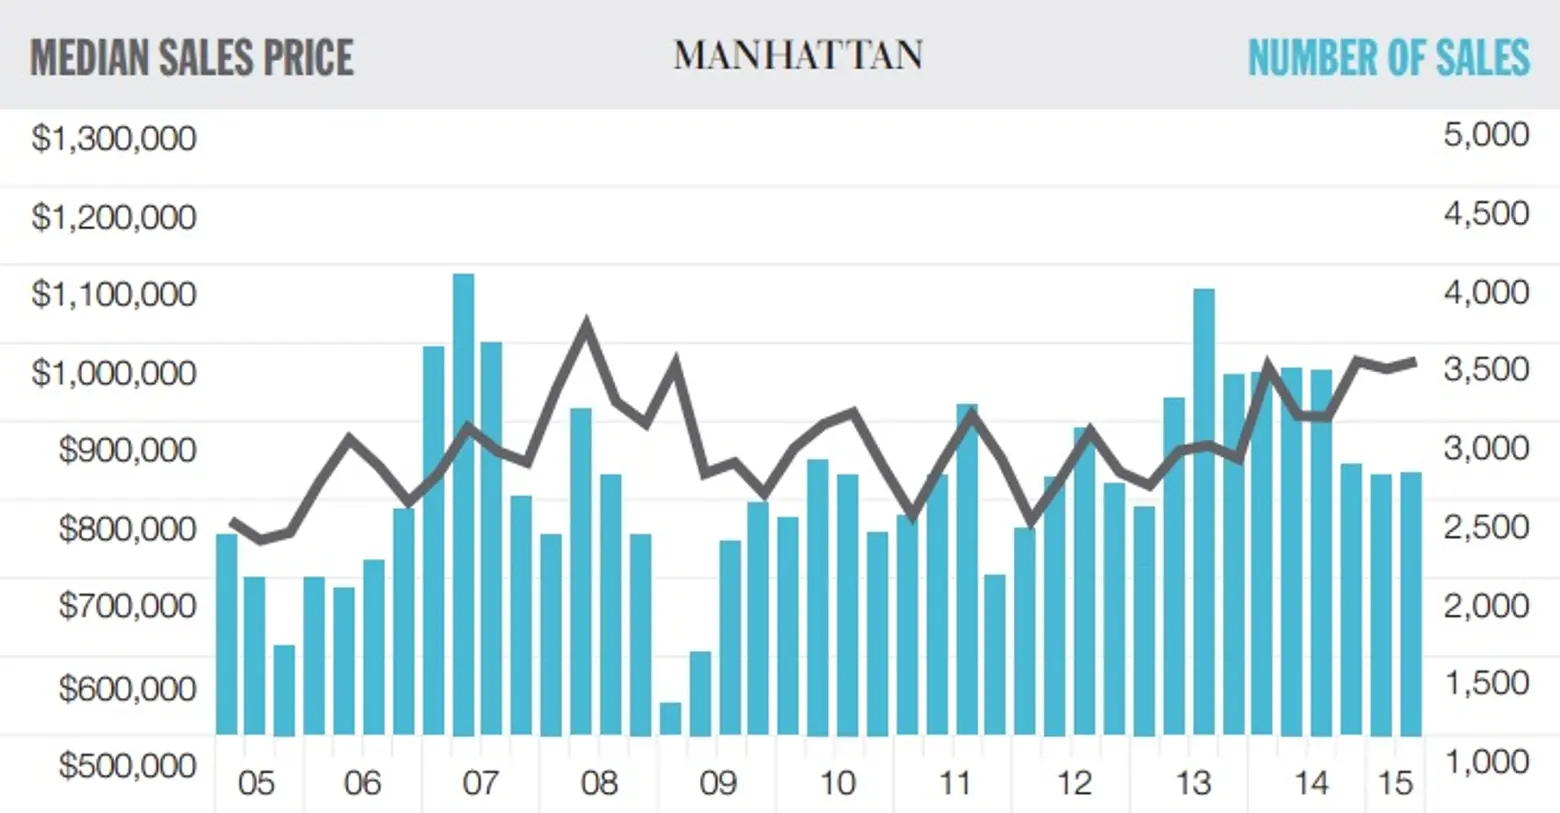 Average Sales Price in Manhattan Hits Record High of $1.8M